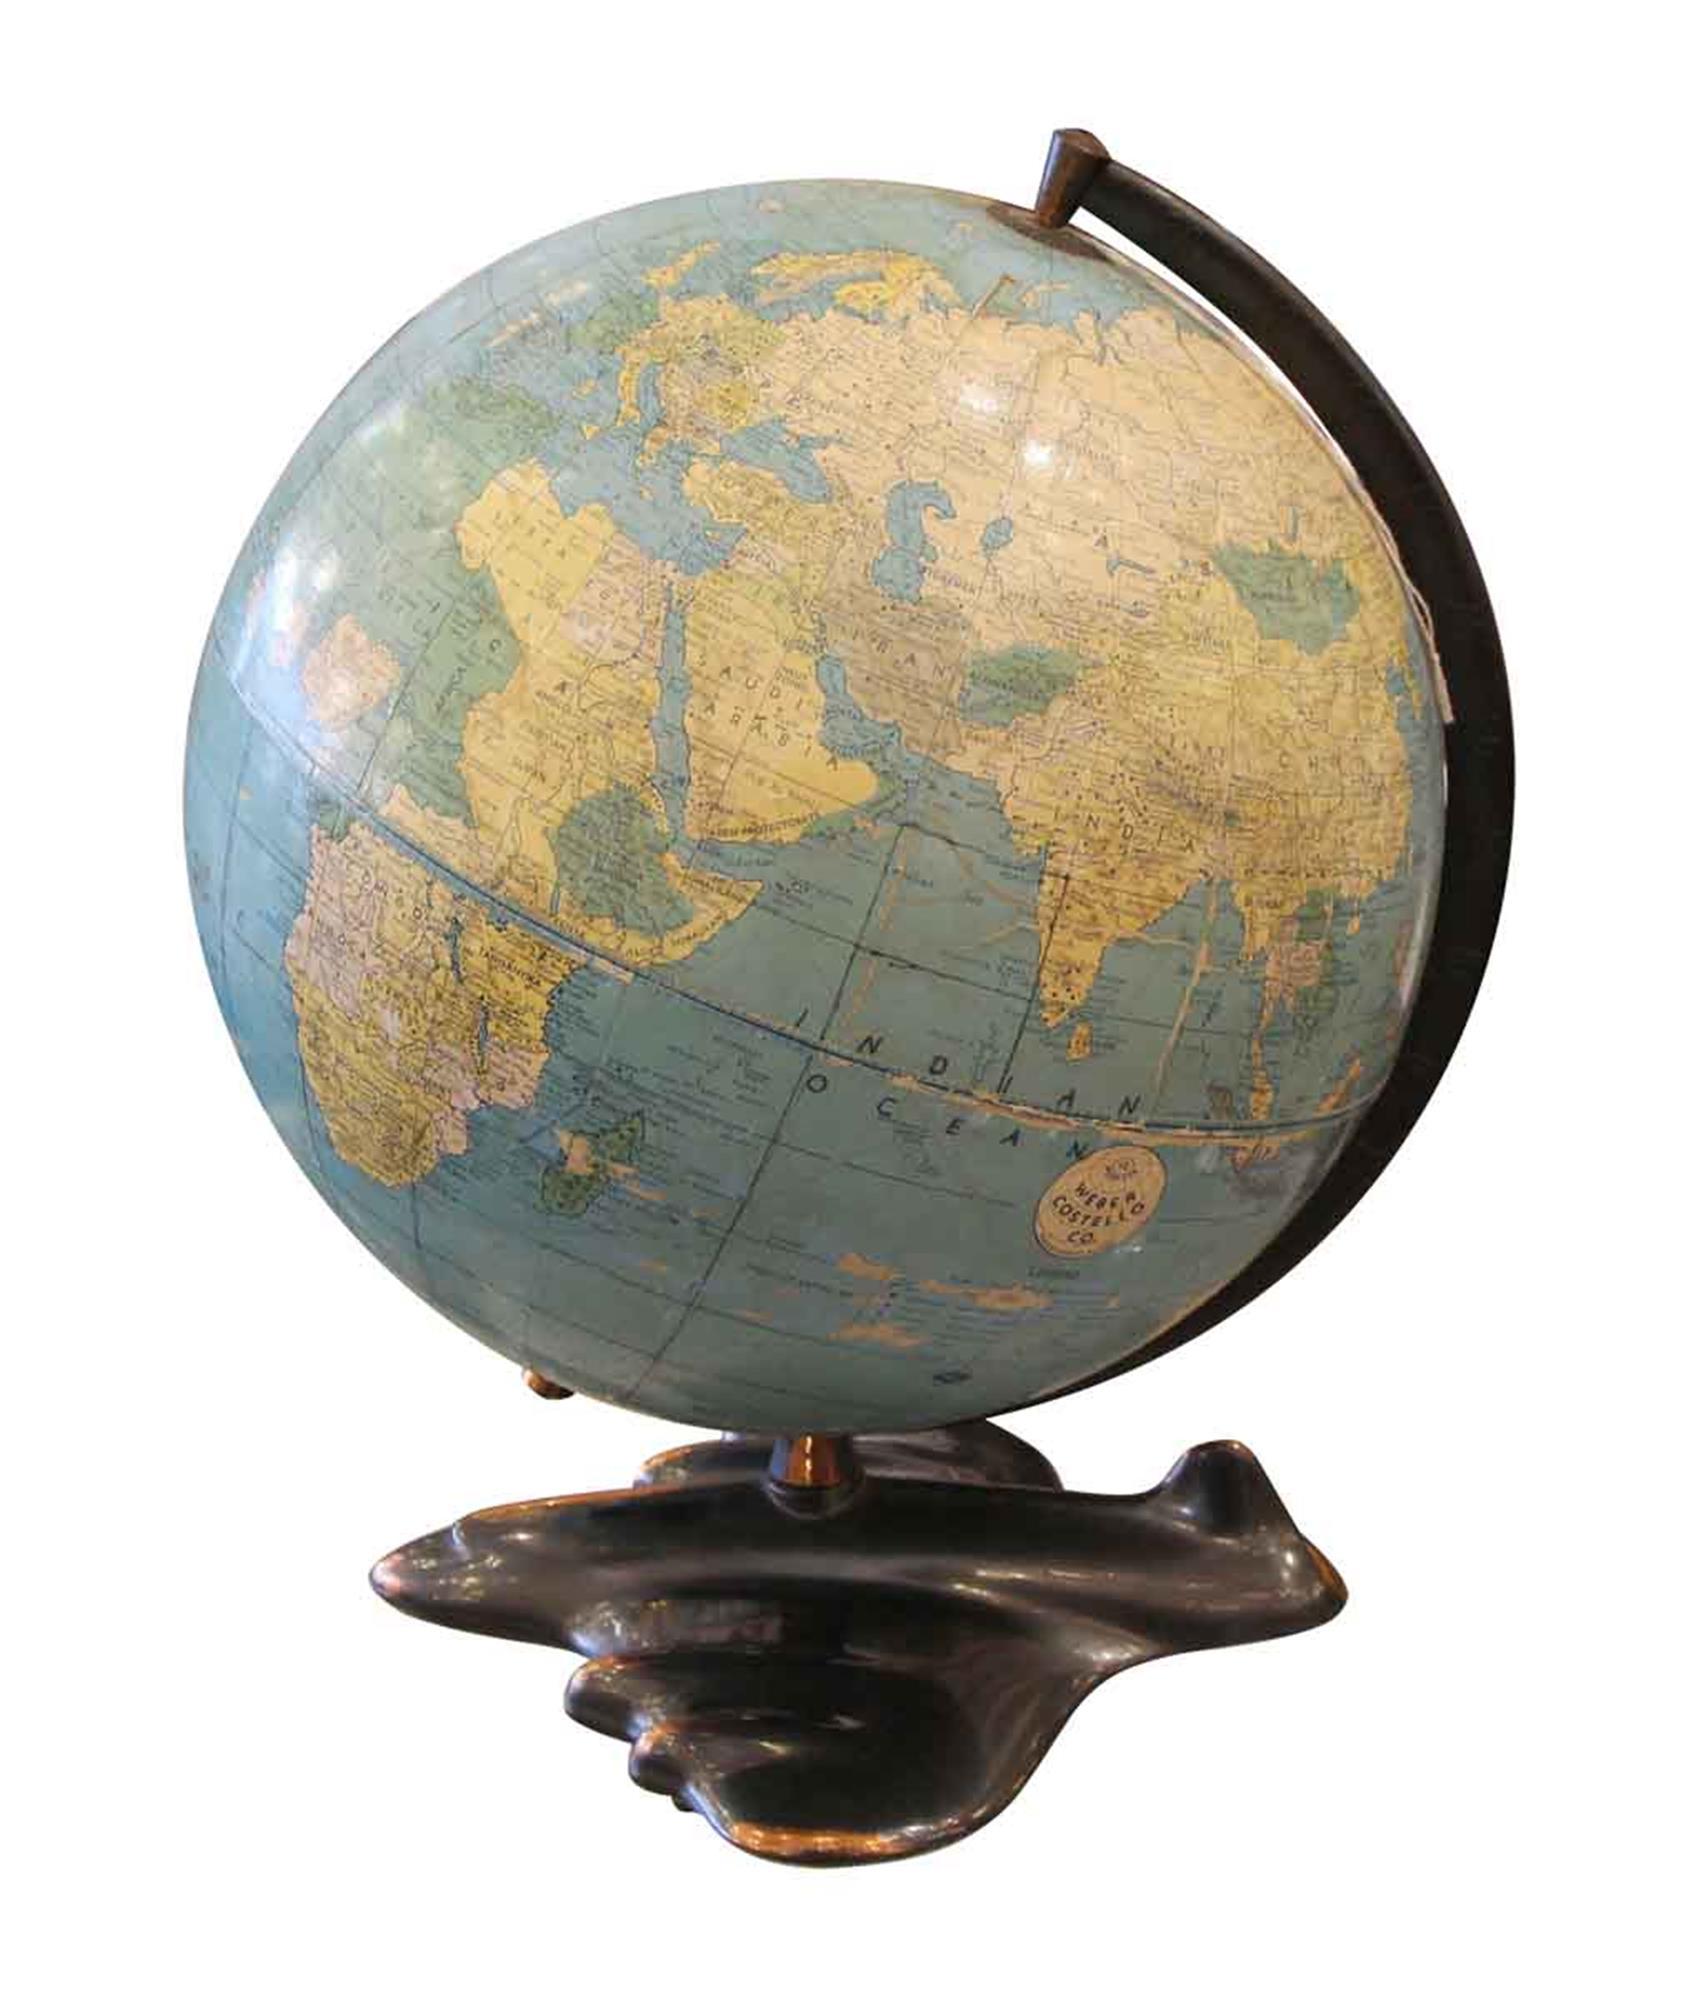 Early 1940s world globe with an airplane shaped Art Deco base with a copper wash. The globe has some worn areas. Made by Weber Costello Co. This can be seen at our 302 Bowery location in Manhattan.